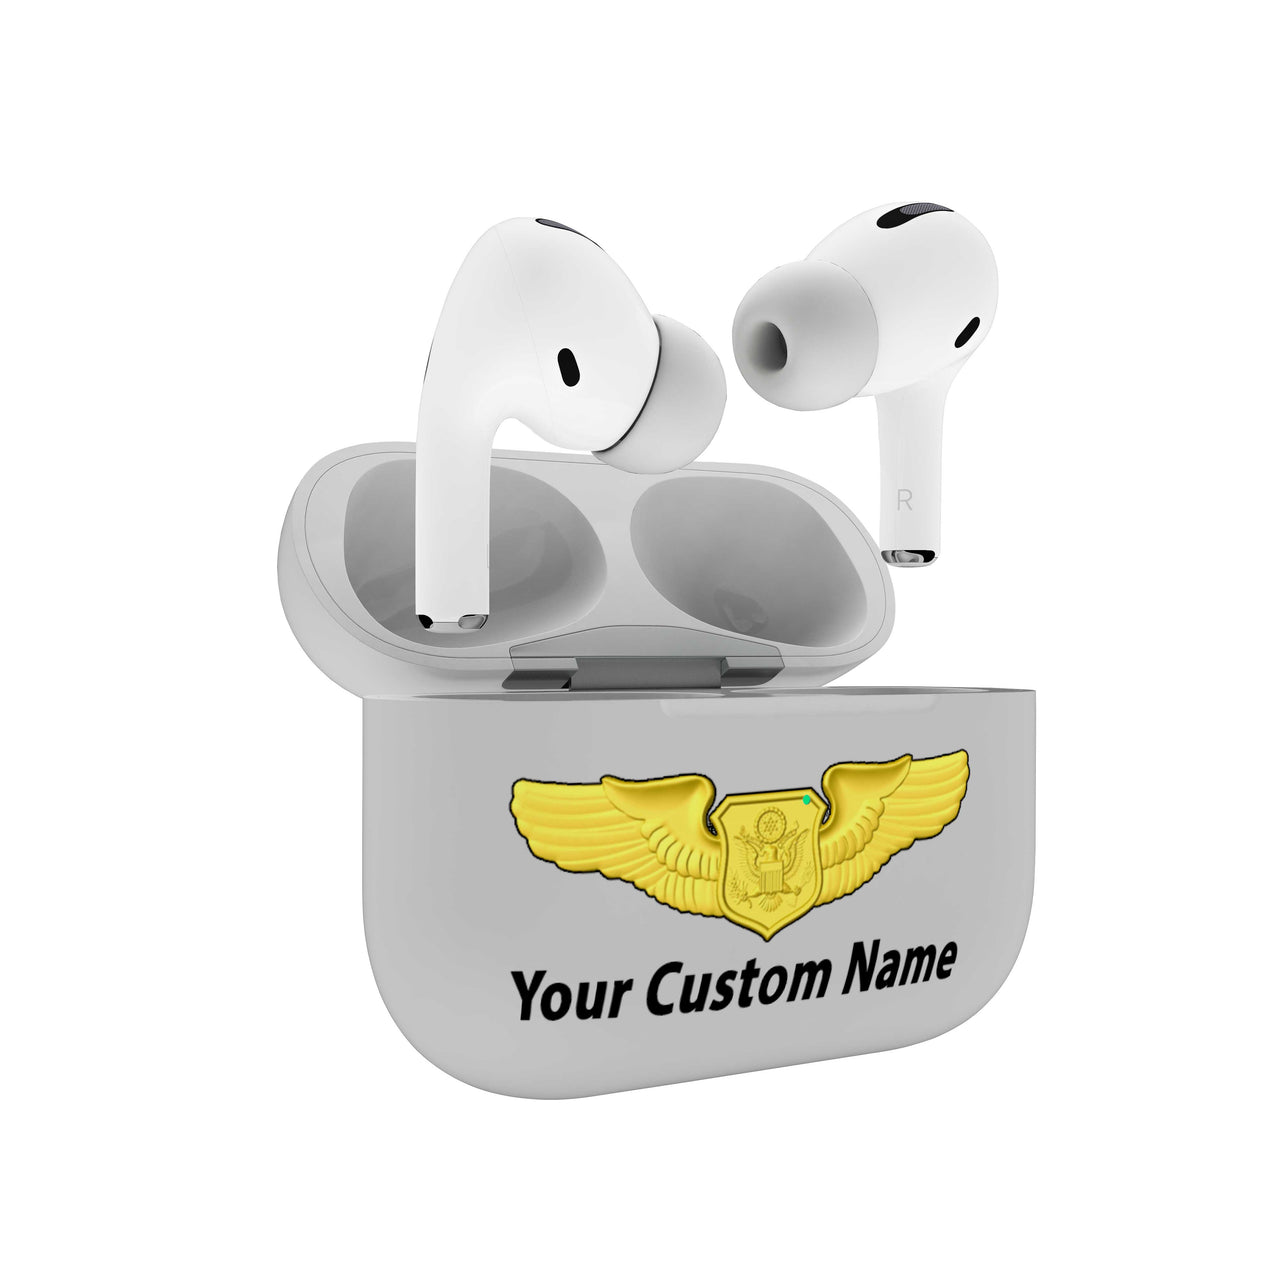 Custom Name (Special US Air Force) Designed Airpods "Pro" Cases